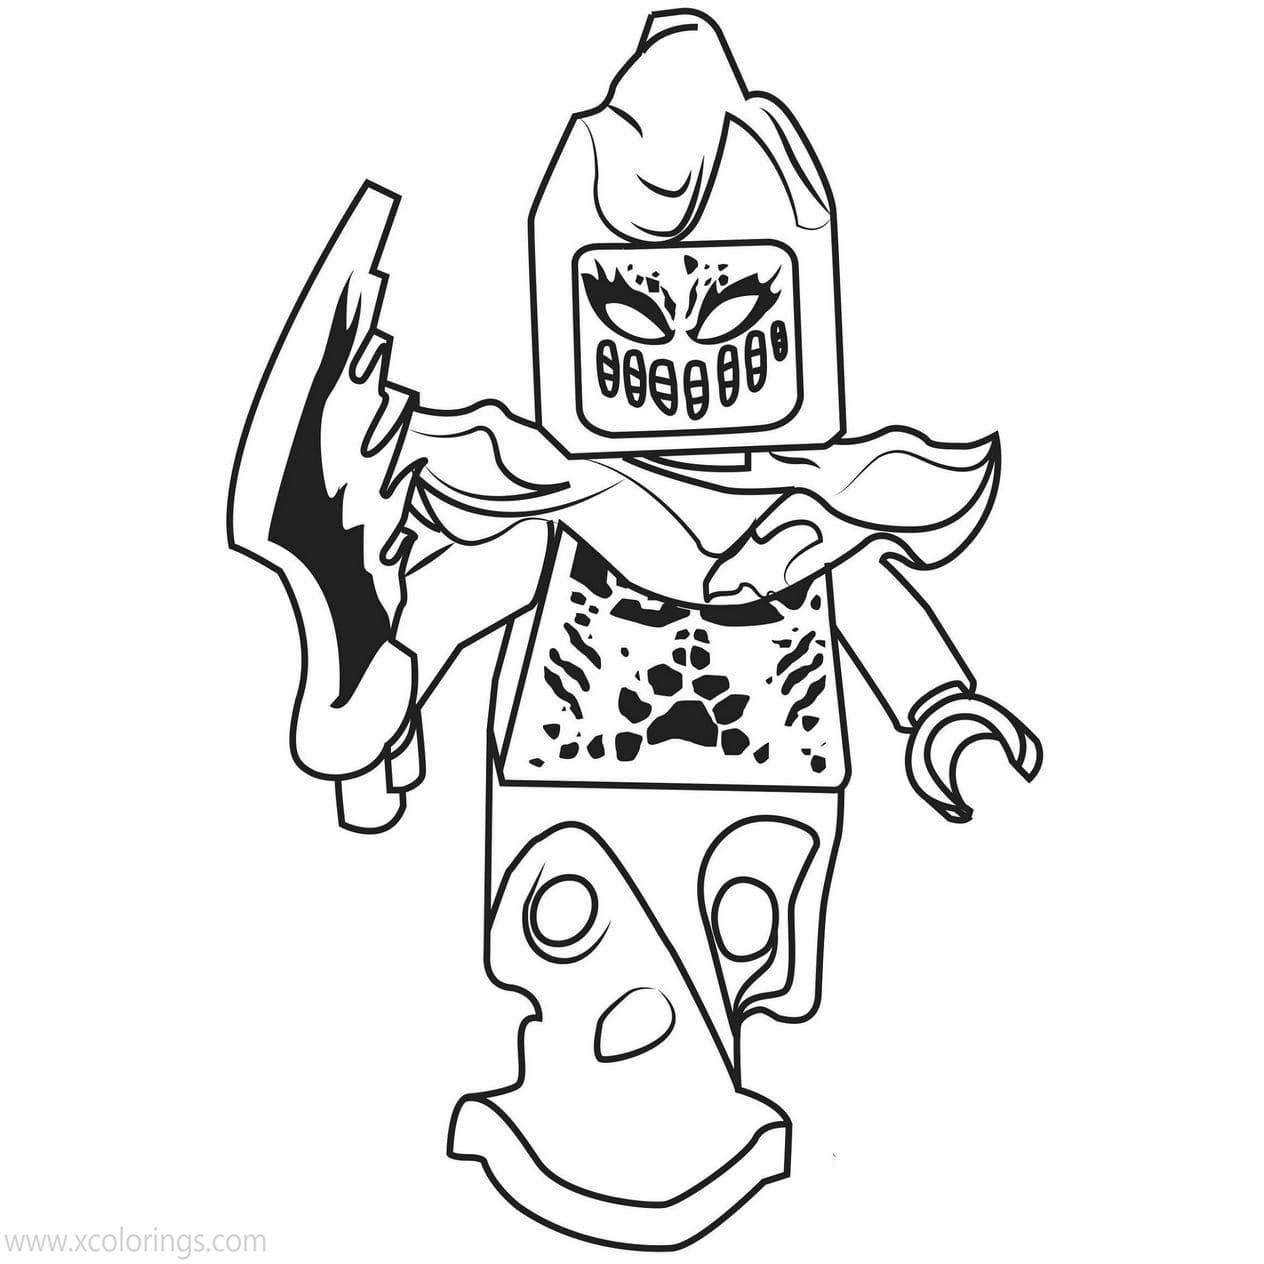 Free LEGO NEXO Knights Coloring Pages Flama printable